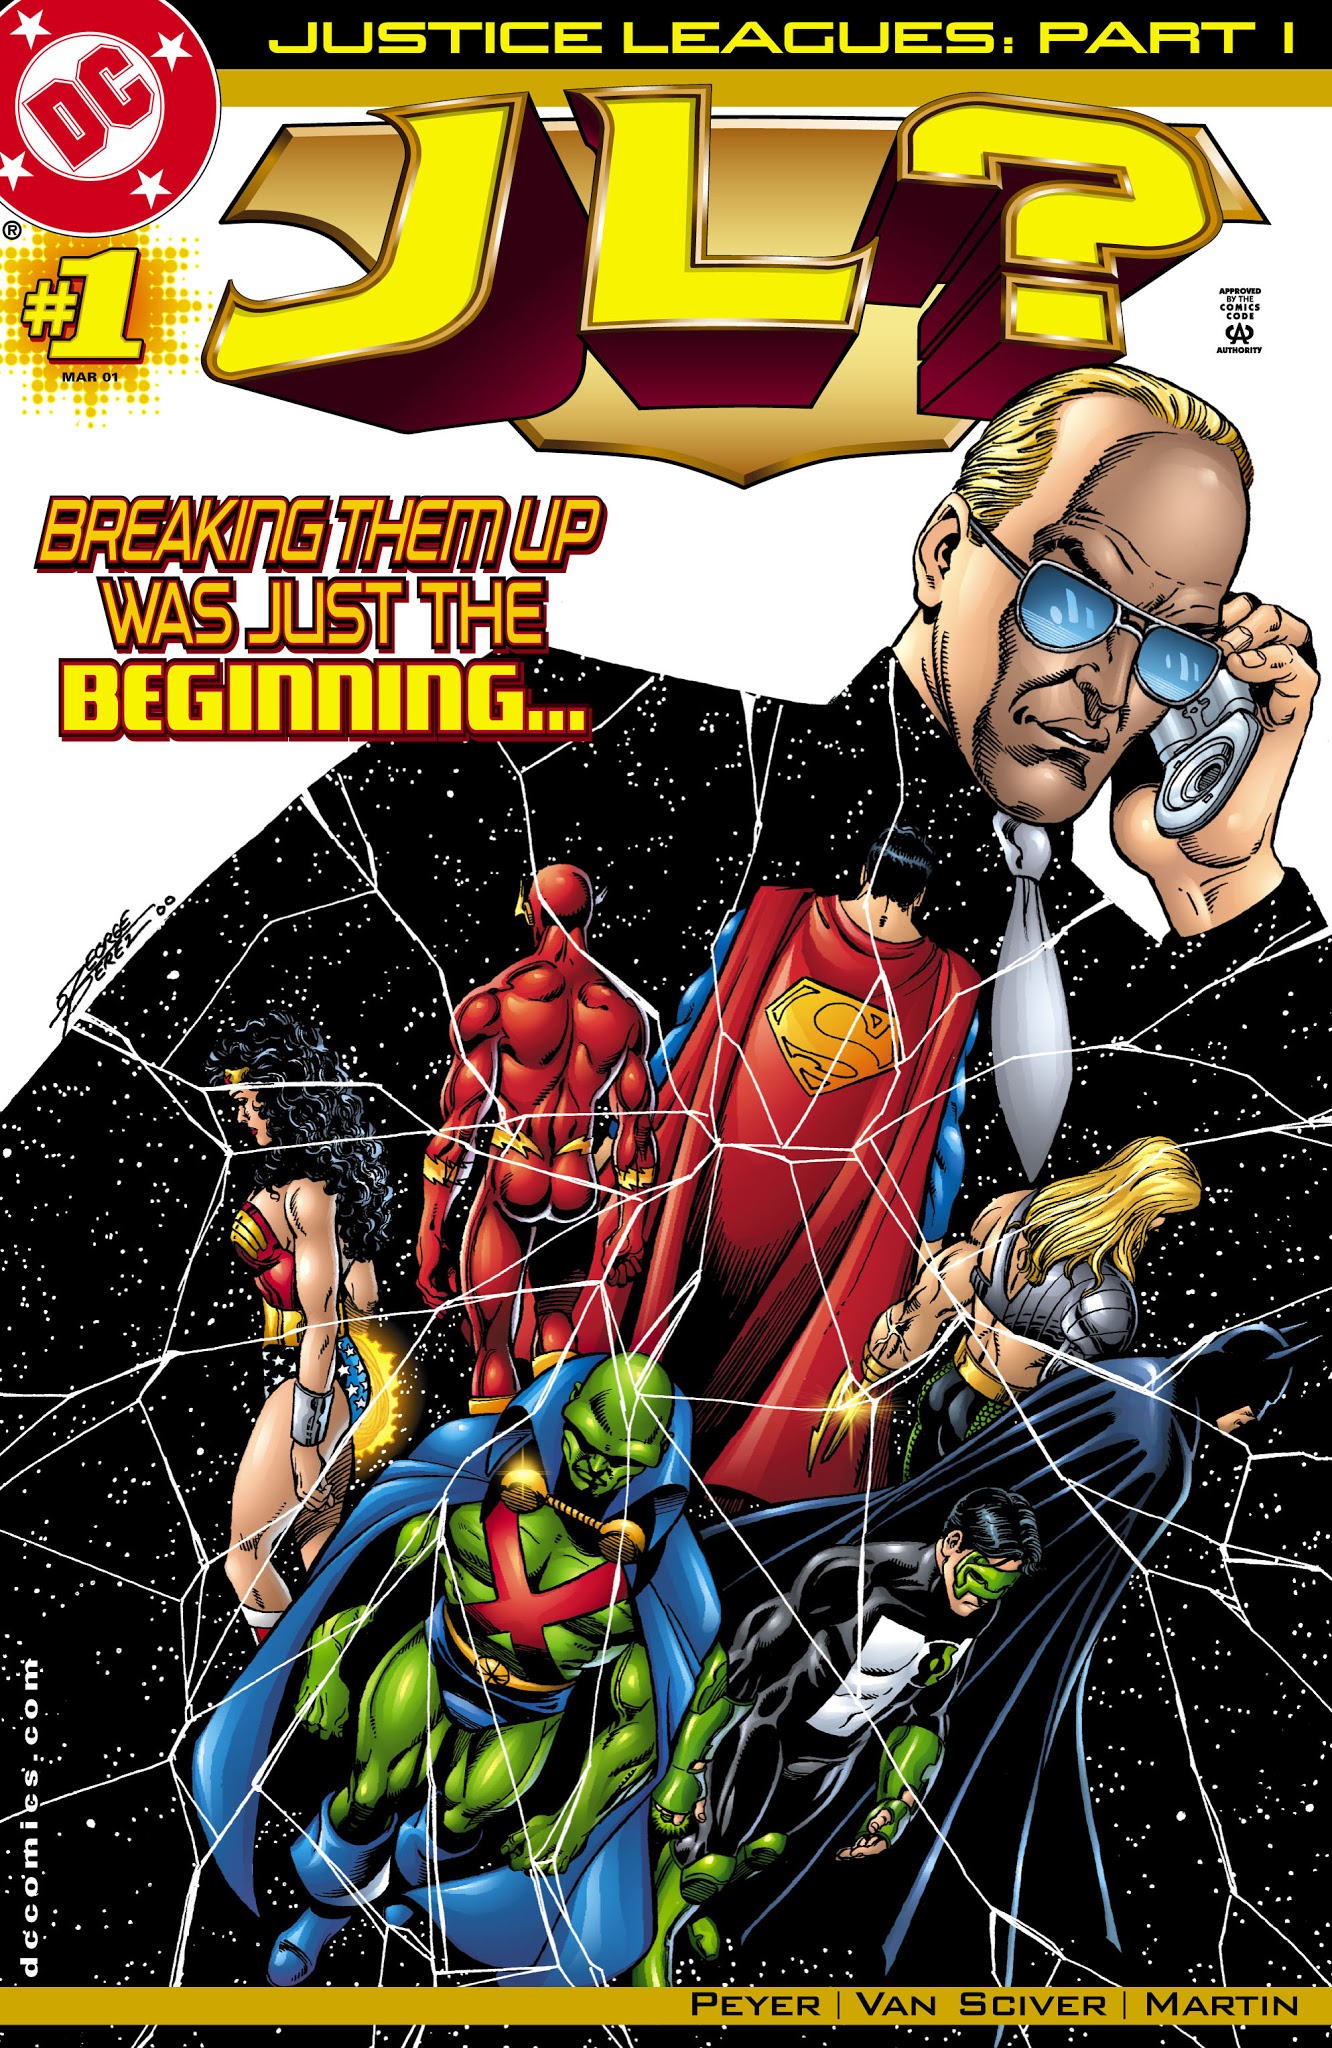 Read online Justice Leagues: JL? comic -  Issue # Full - 1